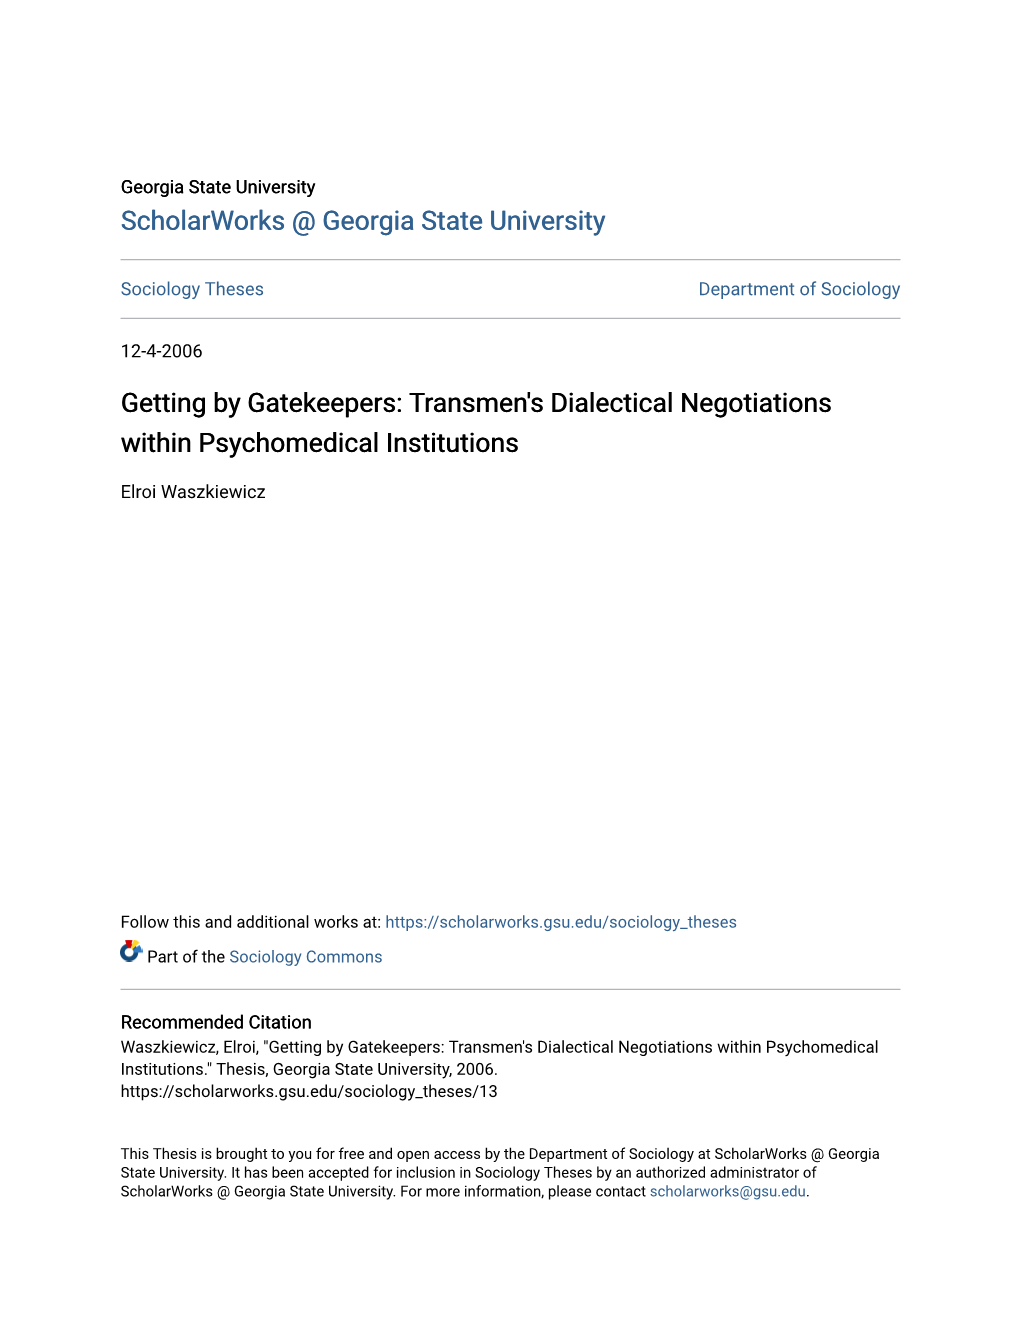 Getting by Gatekeepers: Transmen's Dialectical Negotiations Within Psychomedical Institutions